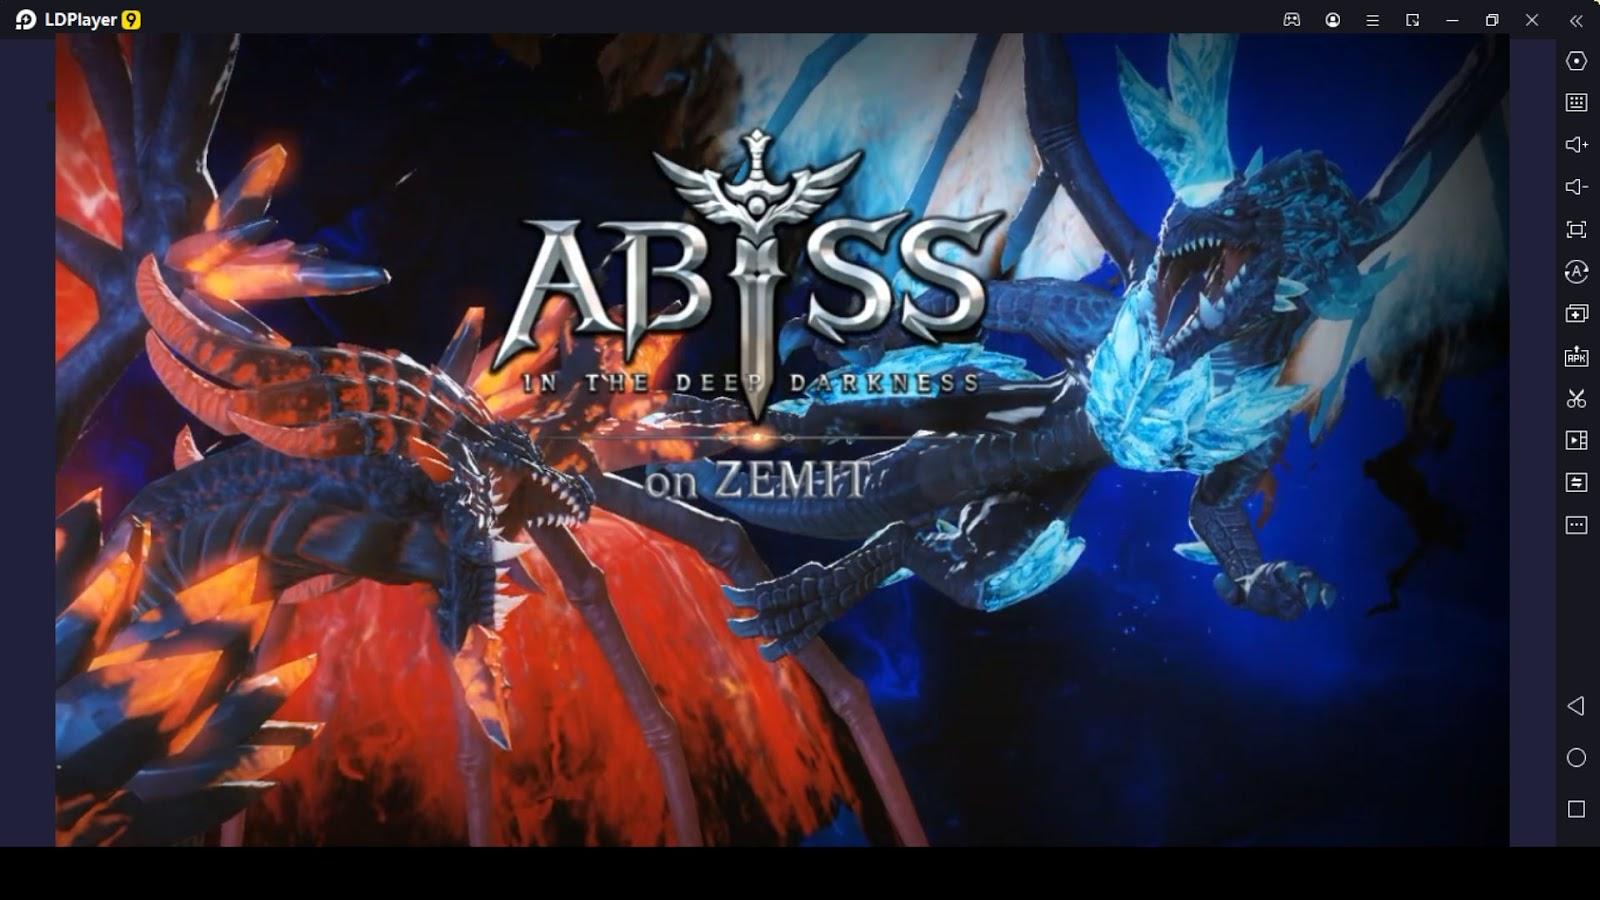 Abyss on ZEMIT Tips